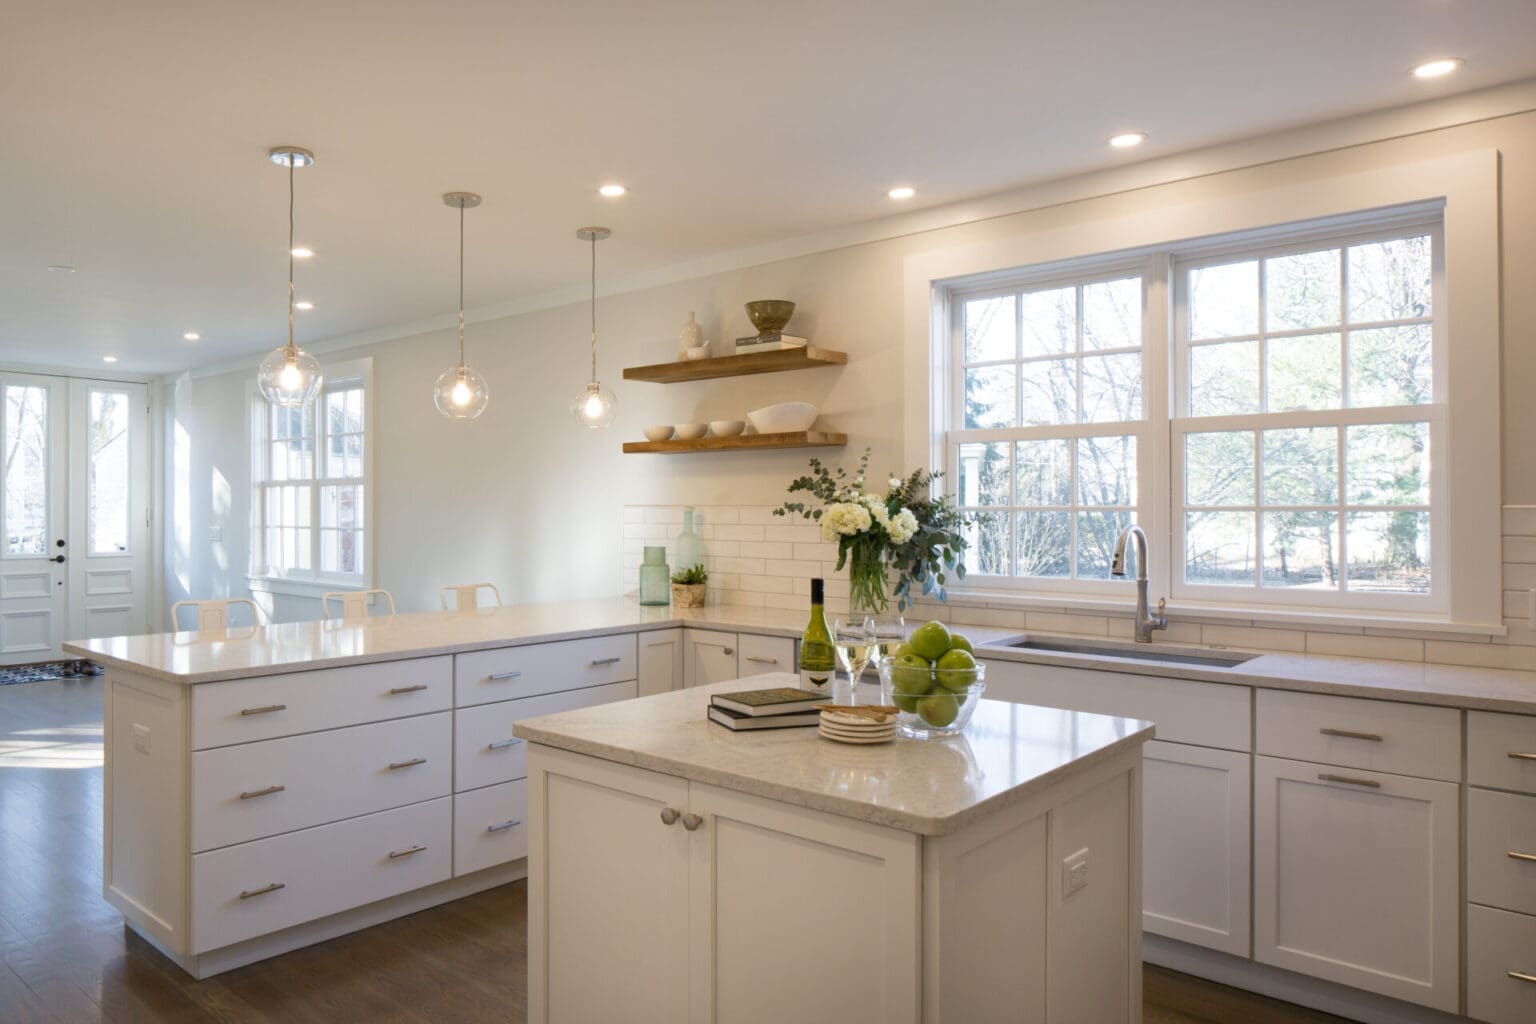 A photo of a kitchen with white painted shaker-style cabinets, stainless steel appliances, white subway tile backsplash, wooden shelves, light grey marble countertops, an island, and three white chairs.